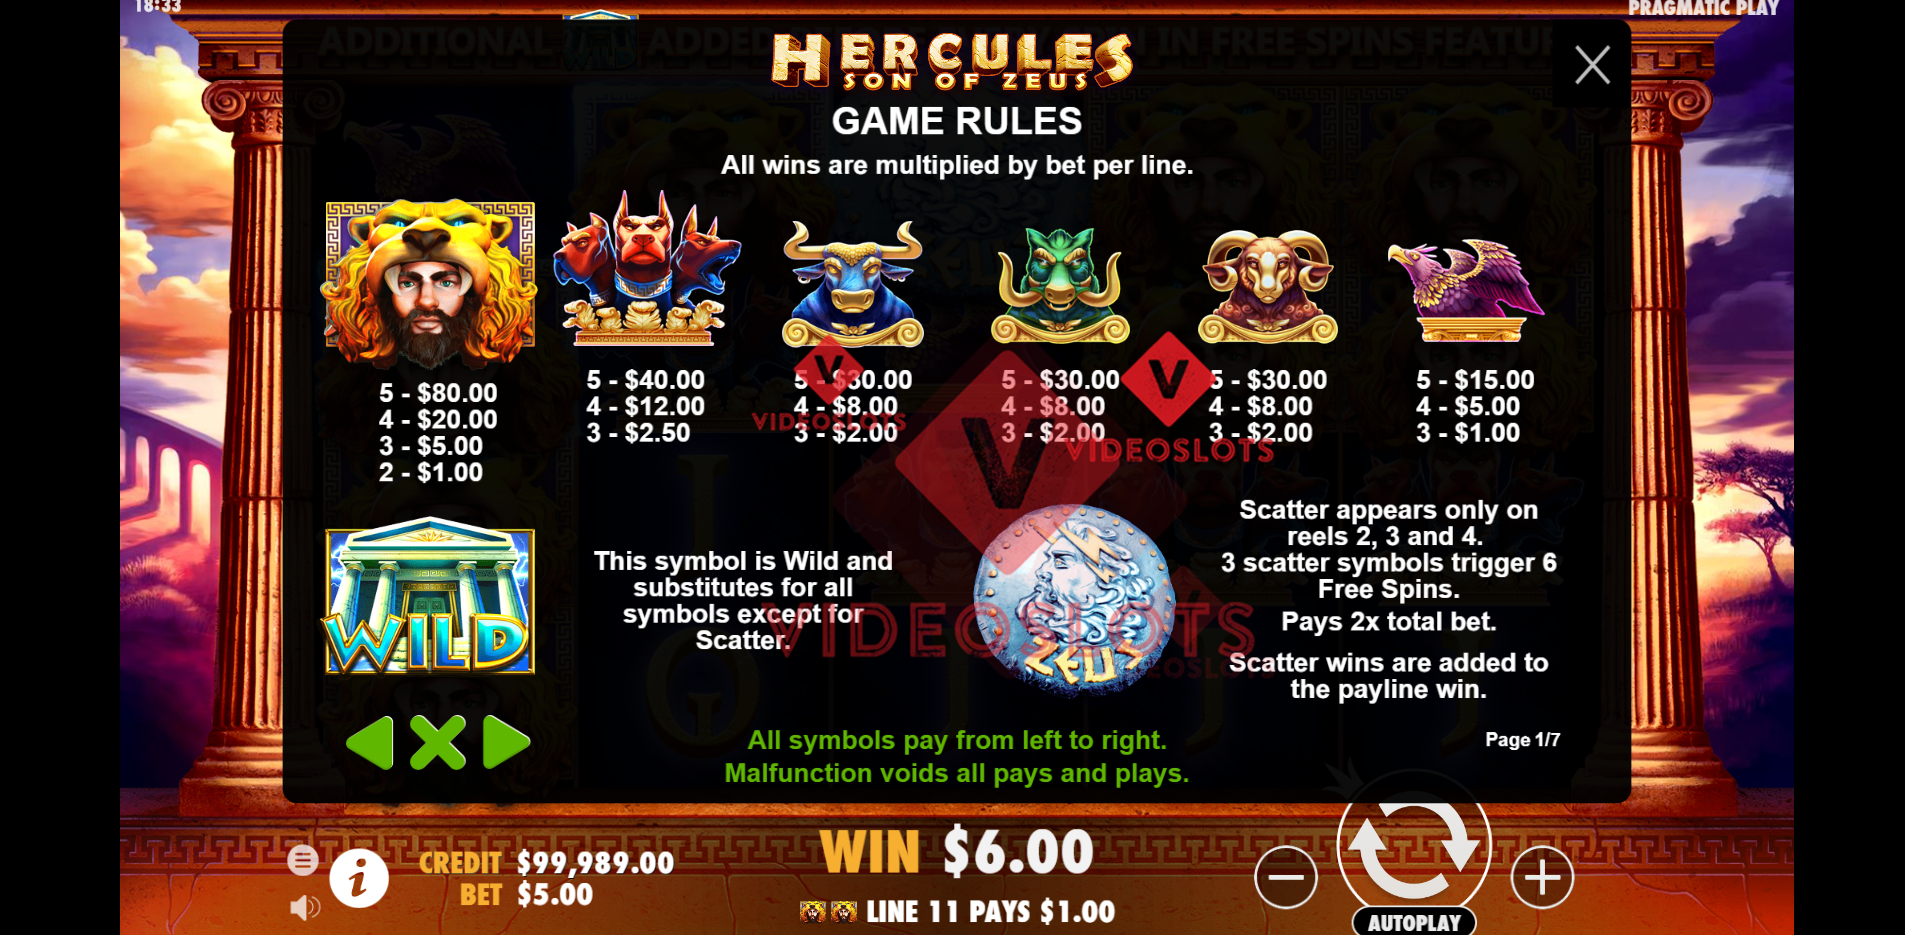 Pay Table for Hercules Son of Zeus slot by Pragmatic Play